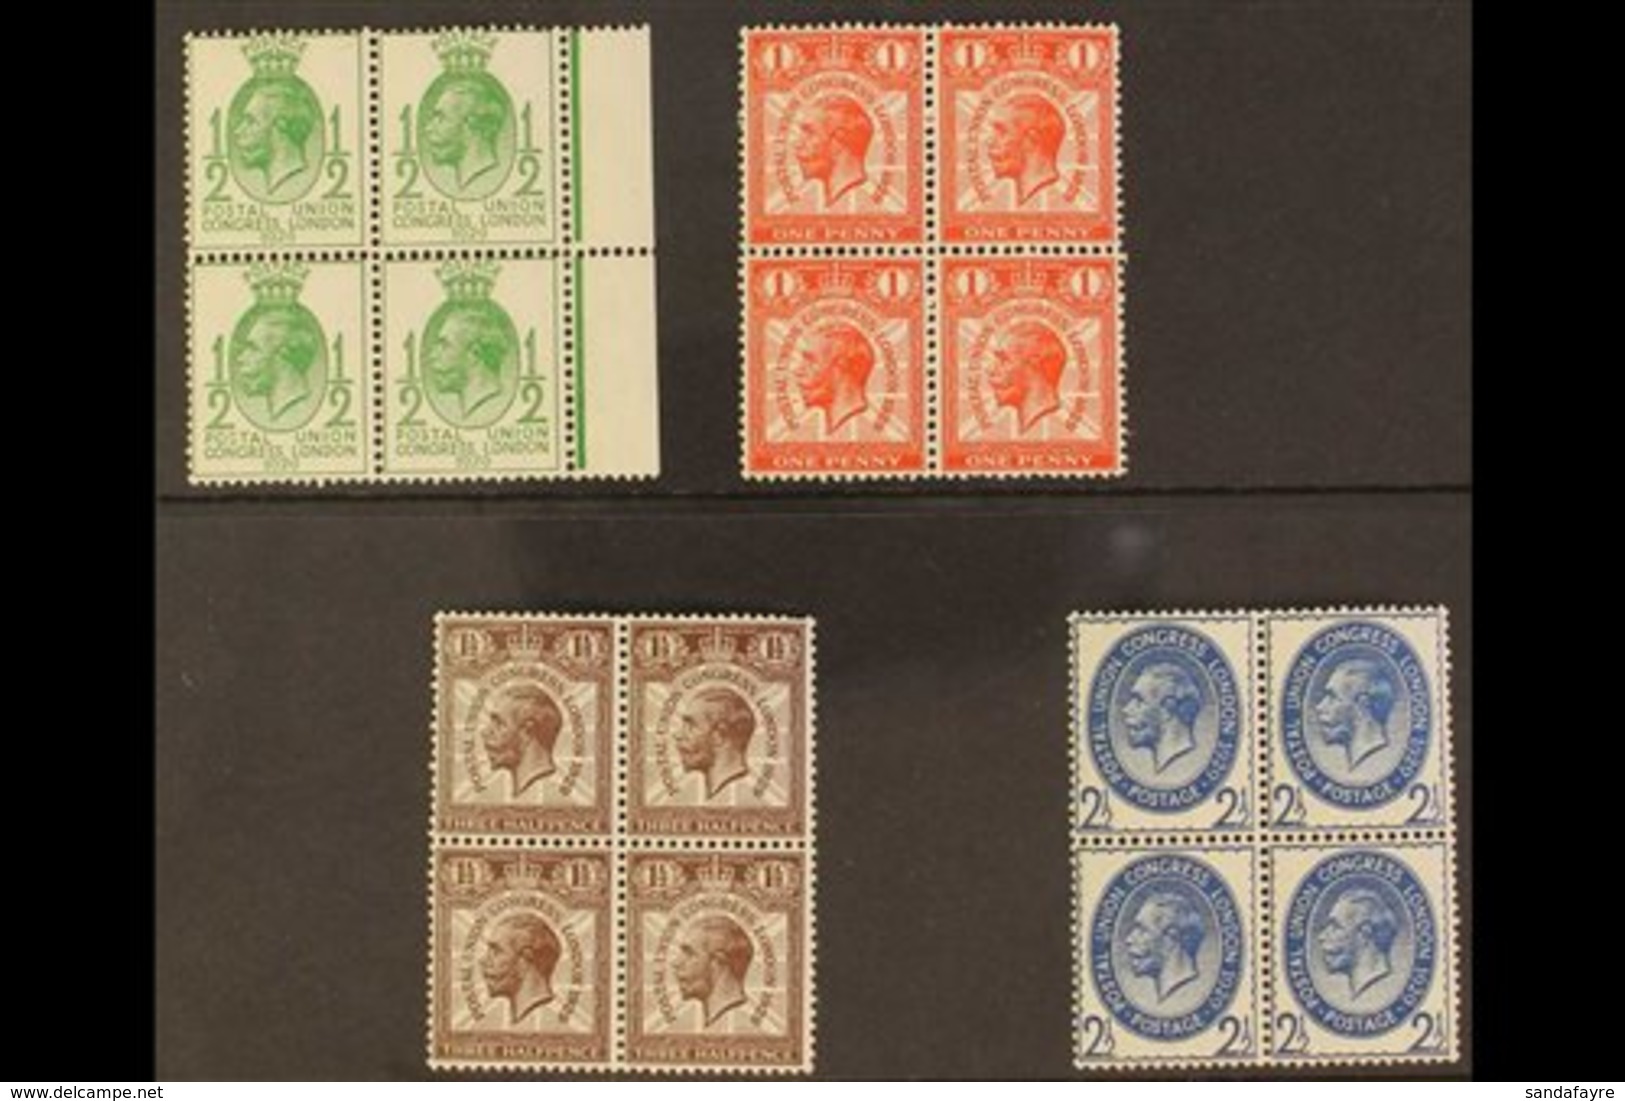 \Y 1929\Y PUC Low Values Set Complete In BLOCKS OF FOUR, SG 434/37, Never Hinged Mint (4 Blocks Of 4) For More Images, P - Unclassified